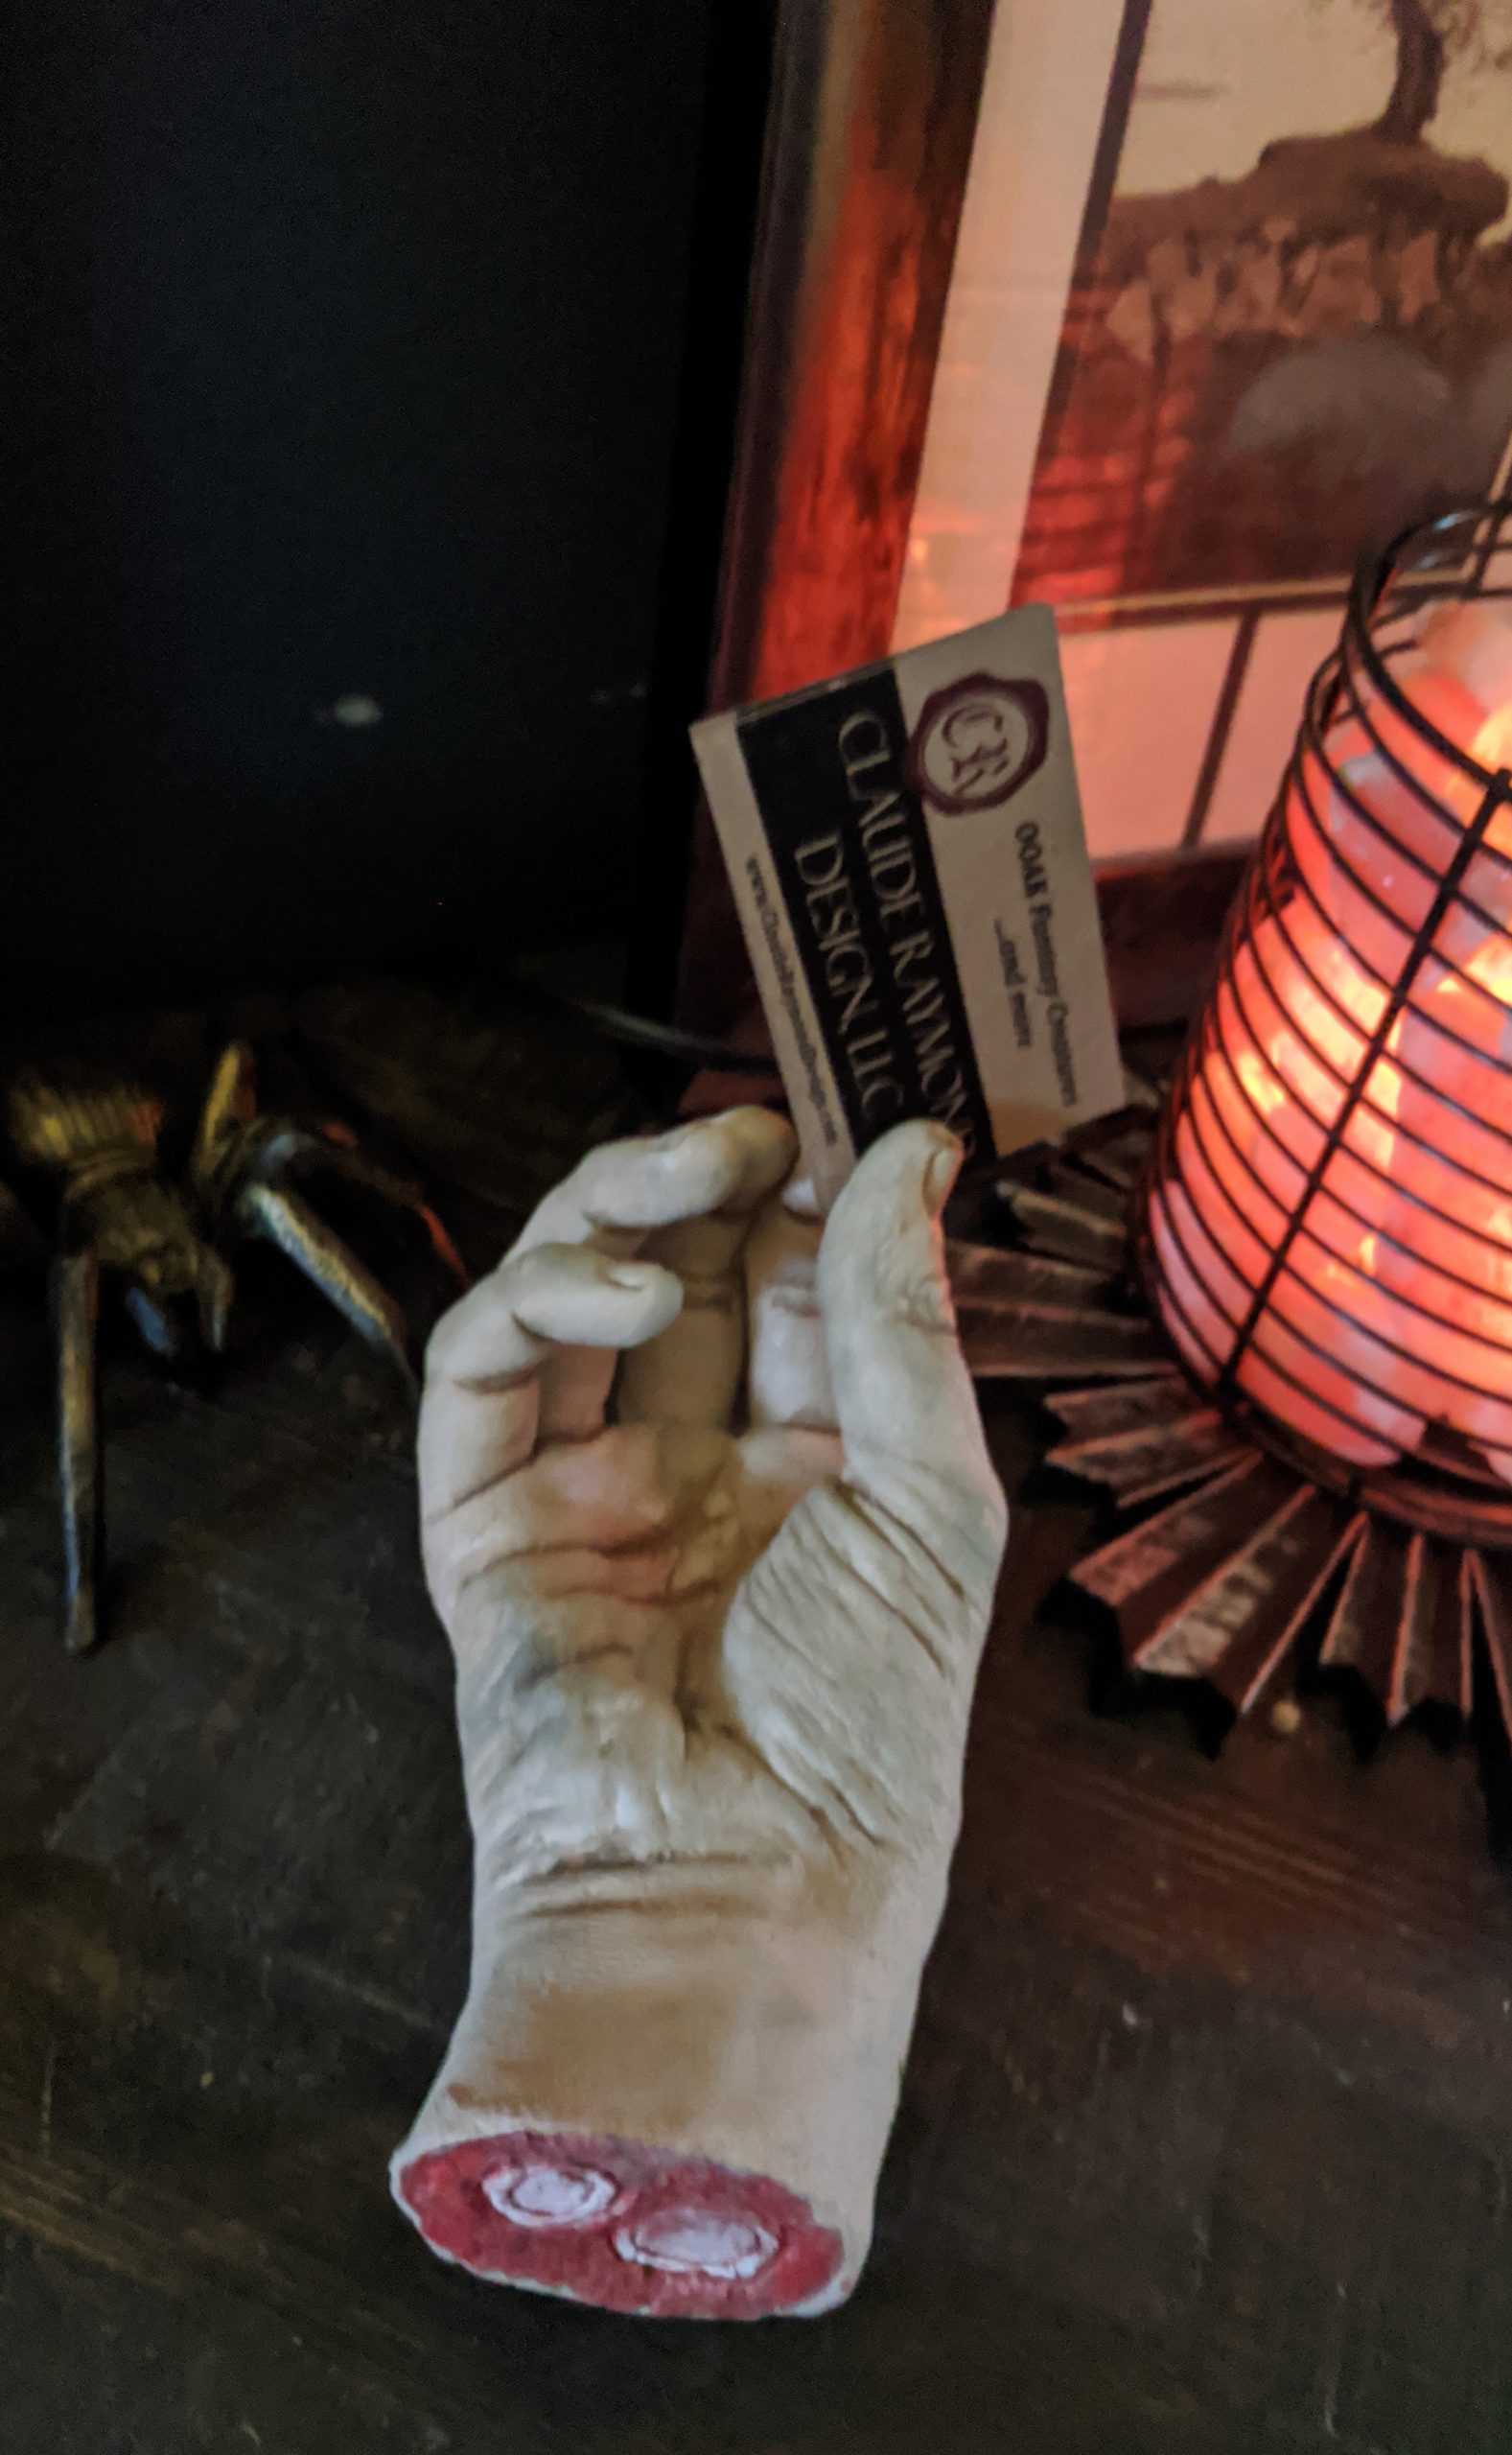 Severed Zombie hand business card holder